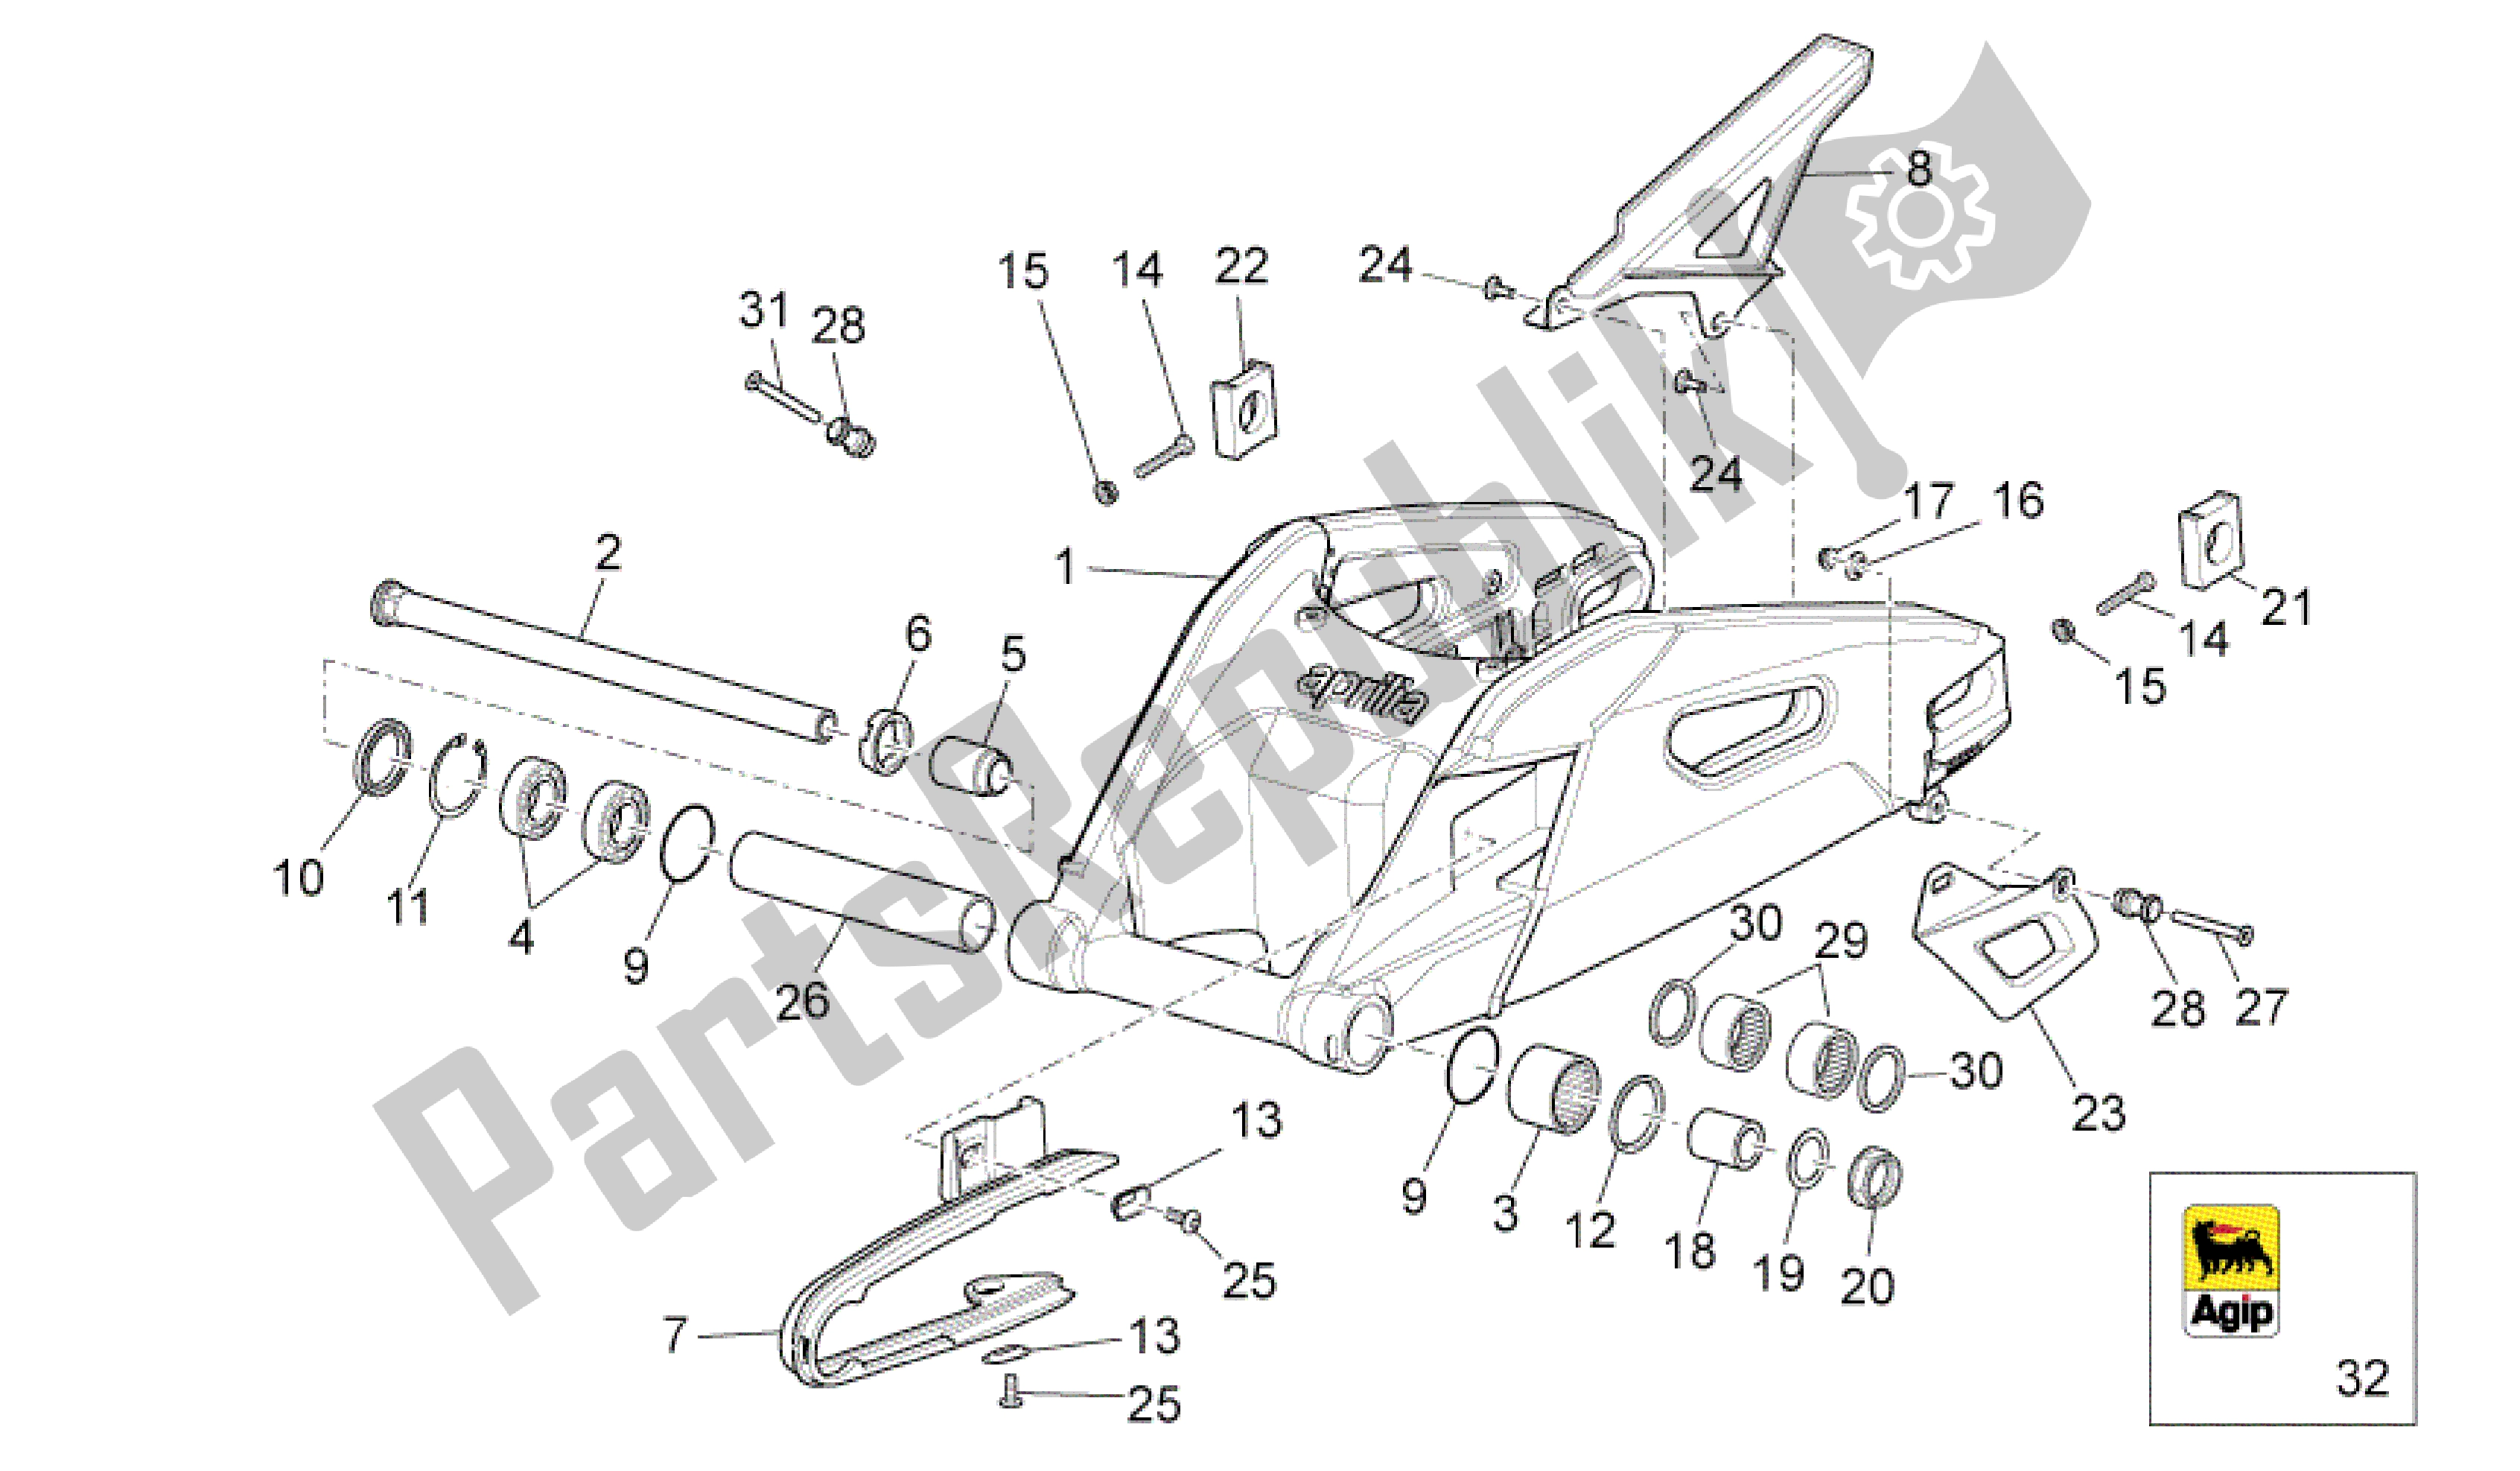 All parts for the Swing Arm of the Aprilia RSV4 Tuono V4 R Aprc ABS 1000 2014